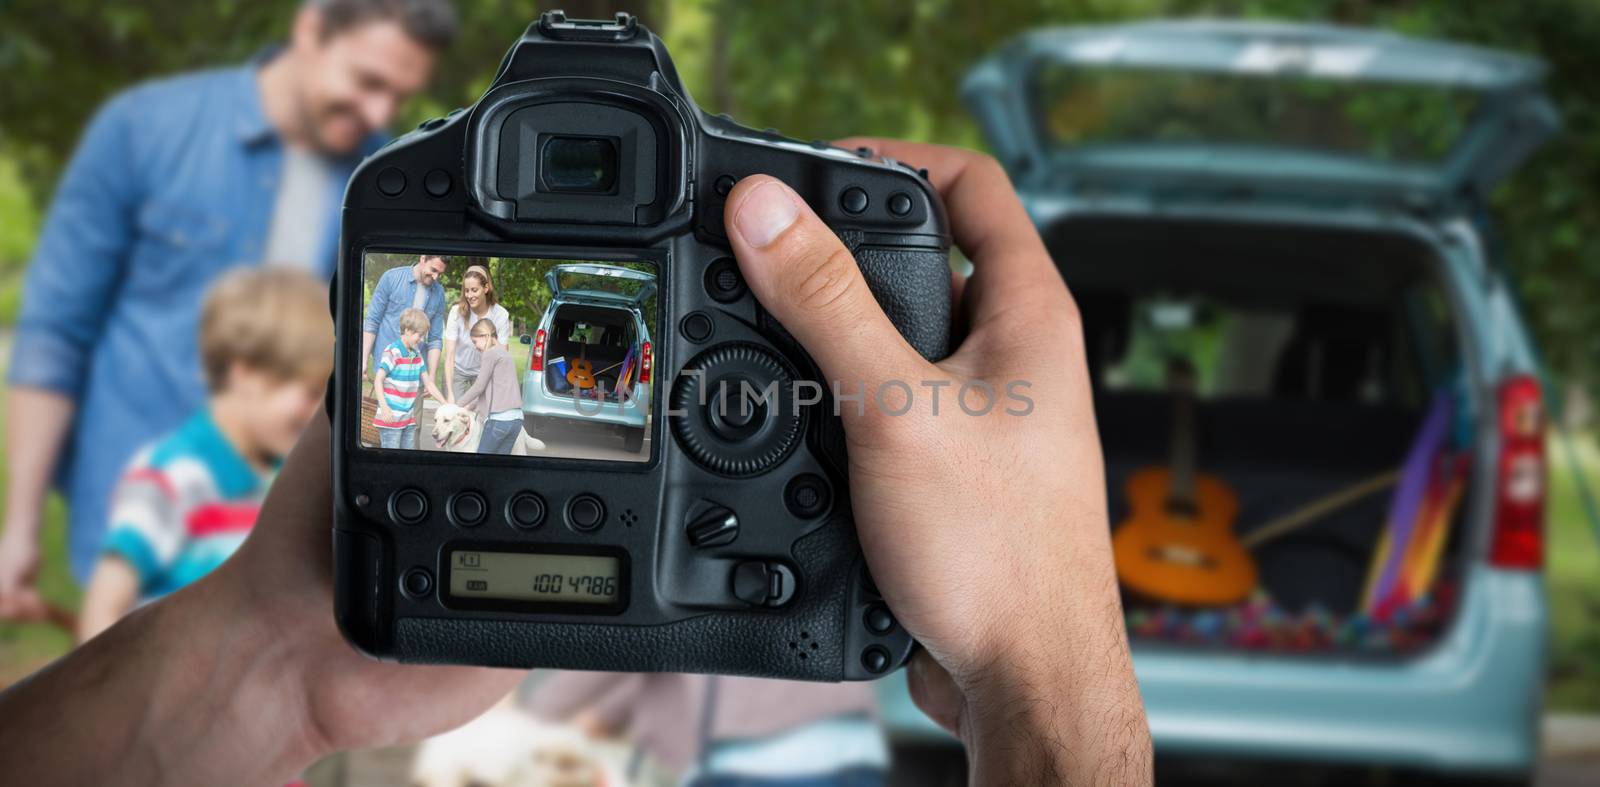 Cropped image of hands holding camera  against family with kids and pet dog at picnic